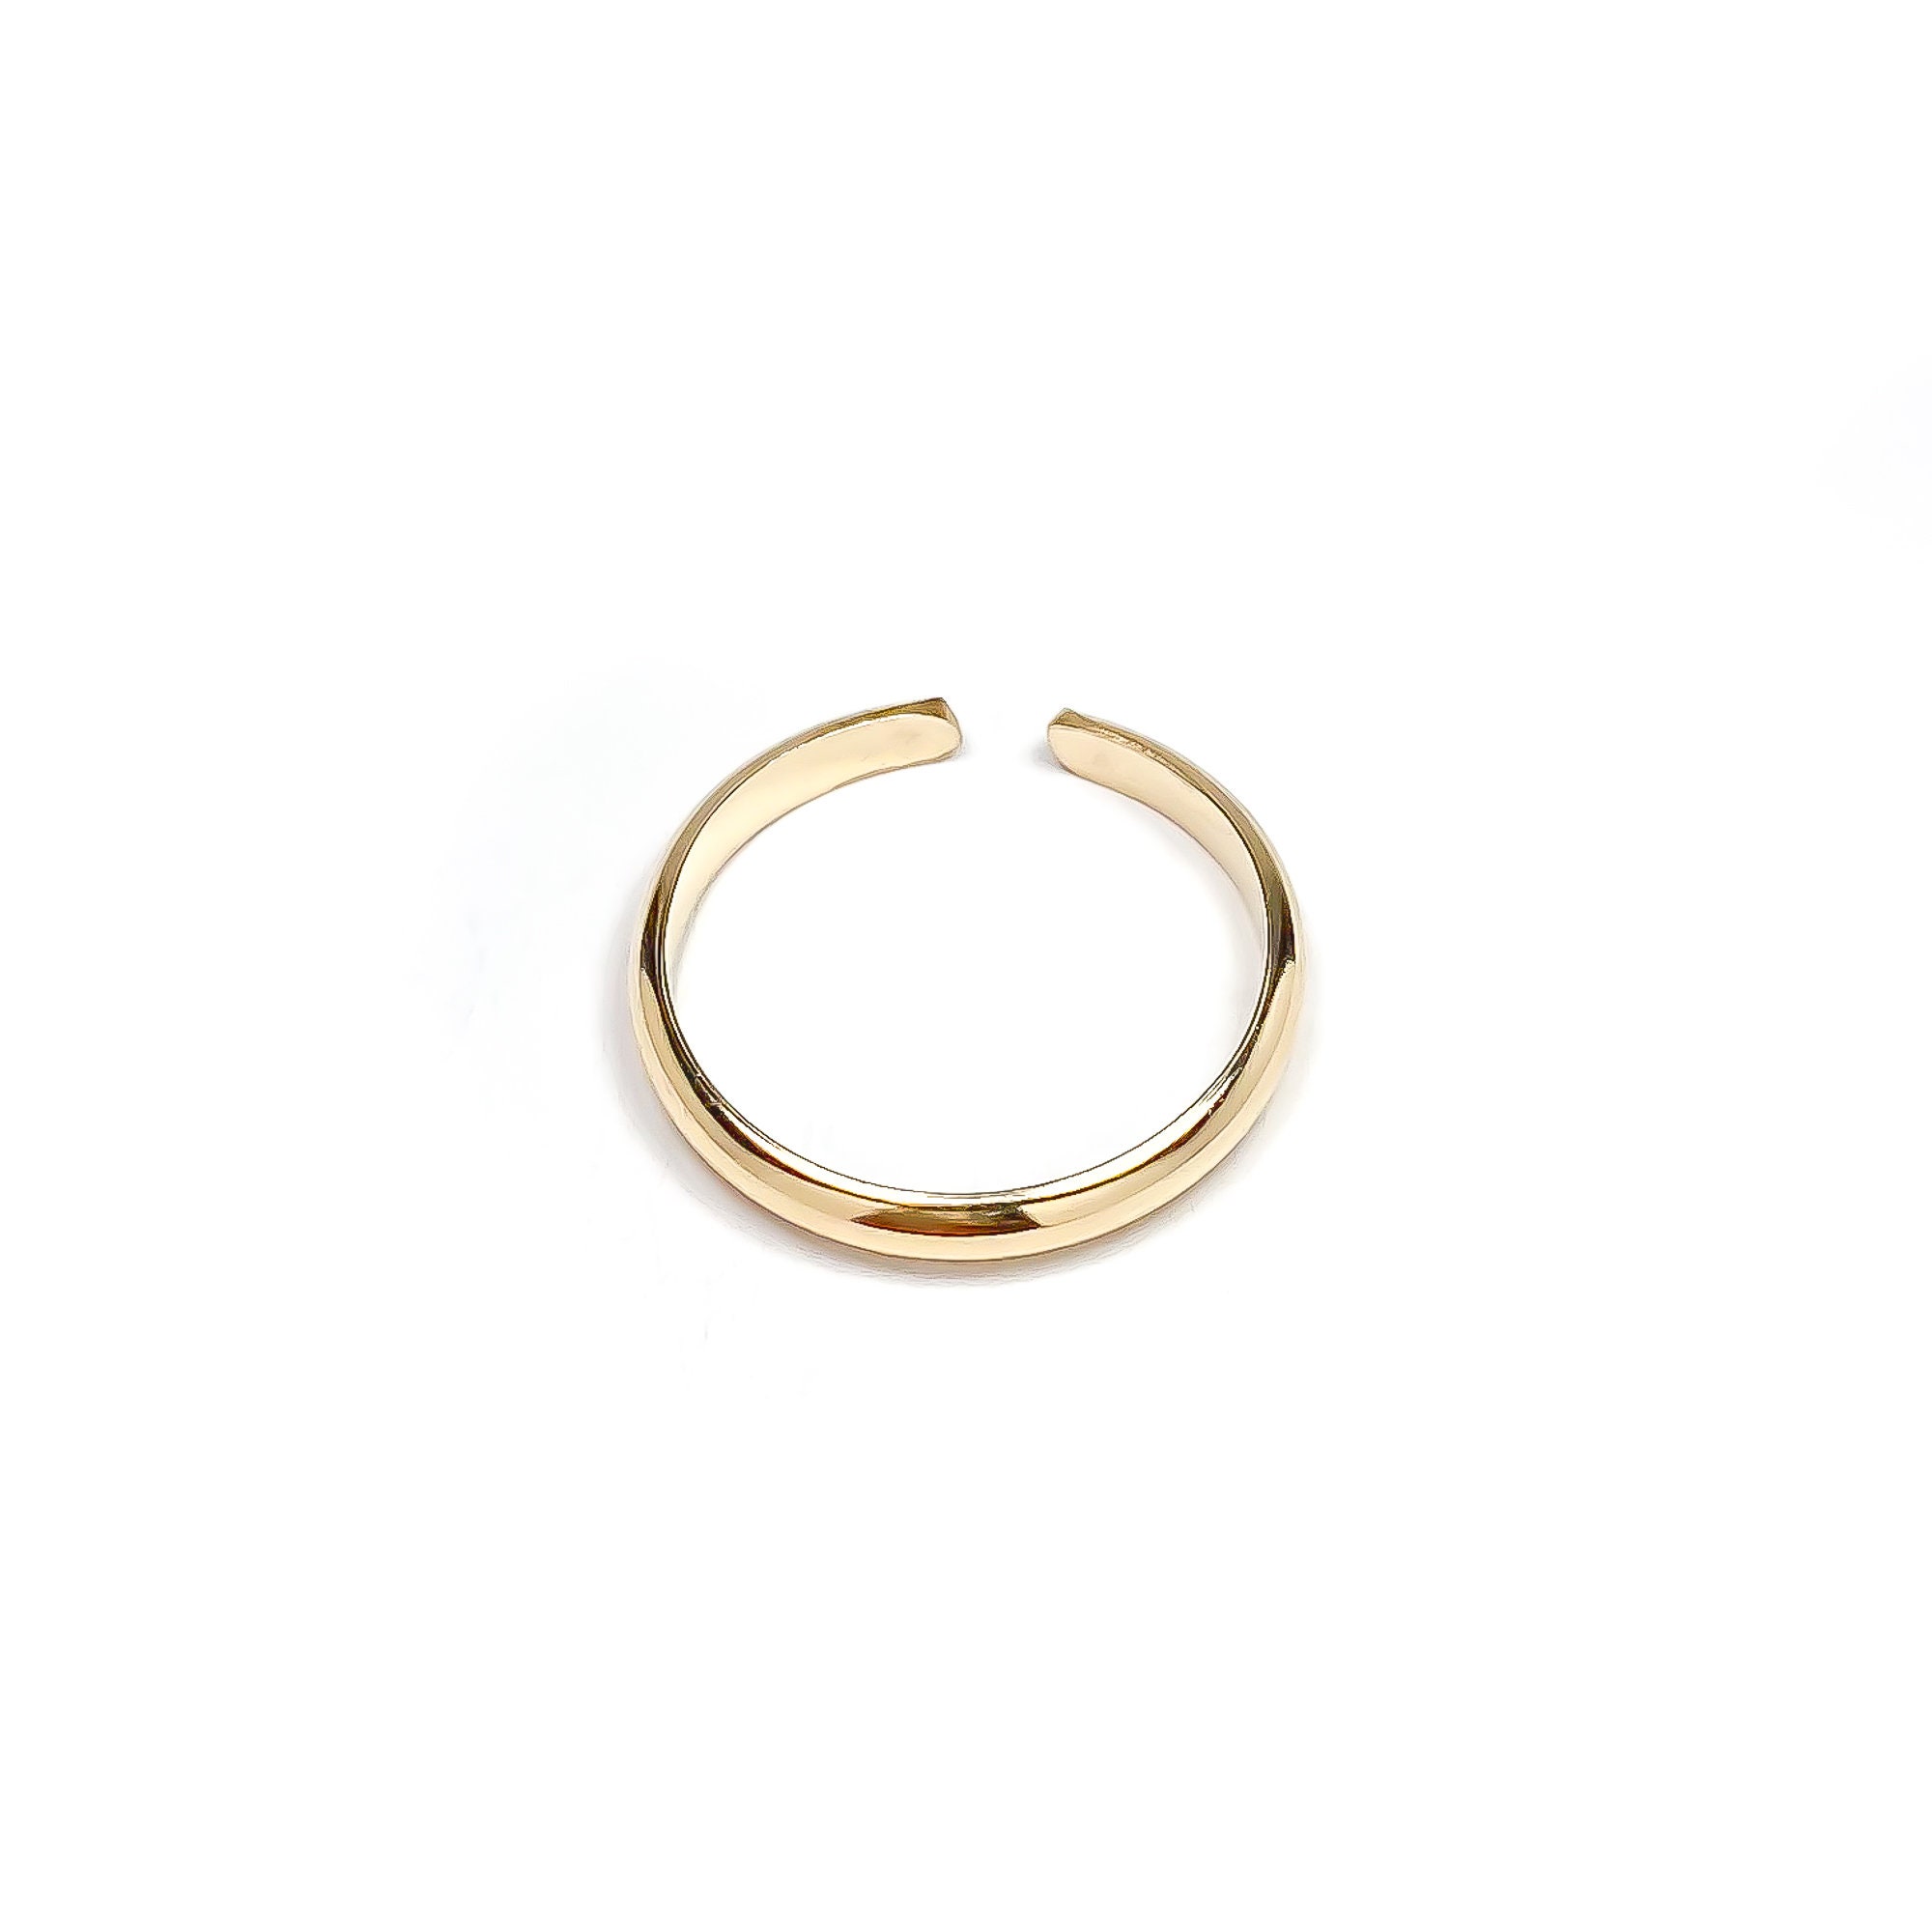 Half Round Toe Ring, 14K Gold Filled – Hoops By Hand